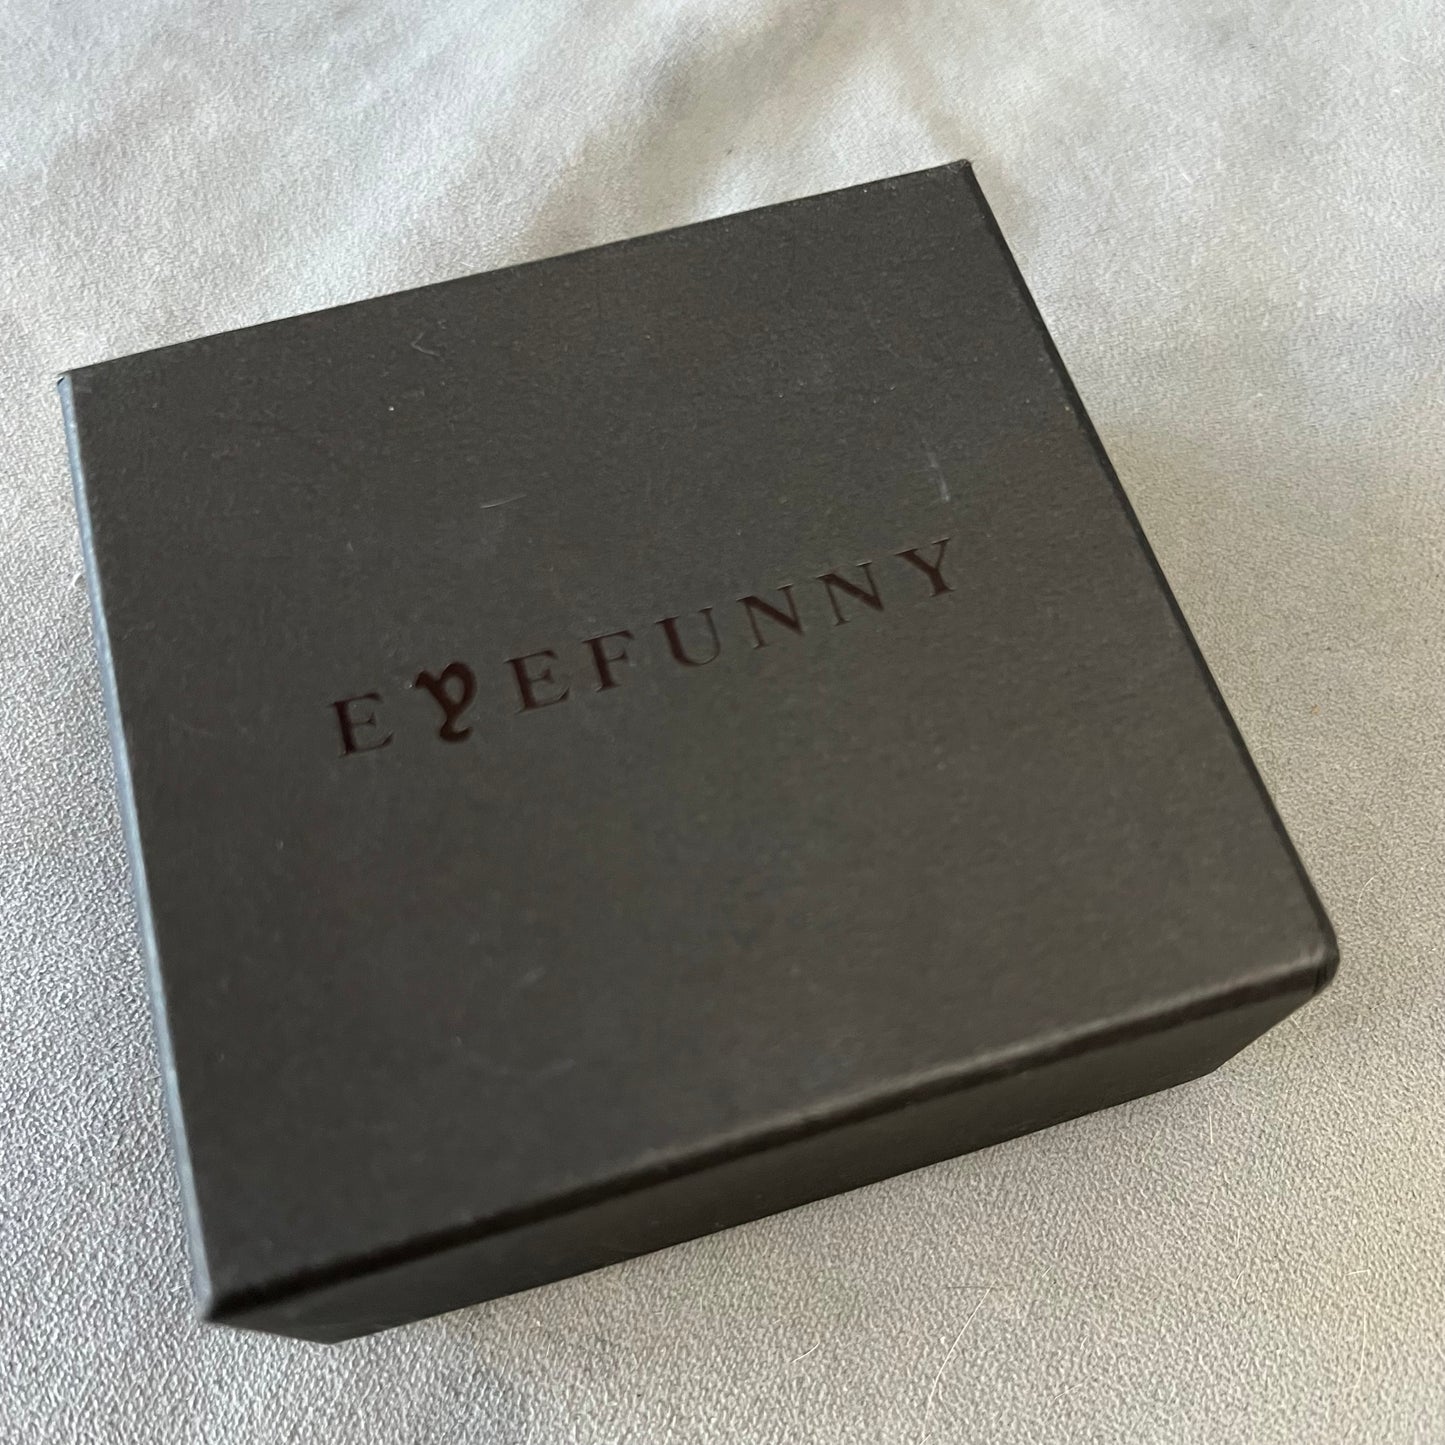 EYEFUNNY Bracelet Box + Outer Box 3.90x3.75x1.75 inches